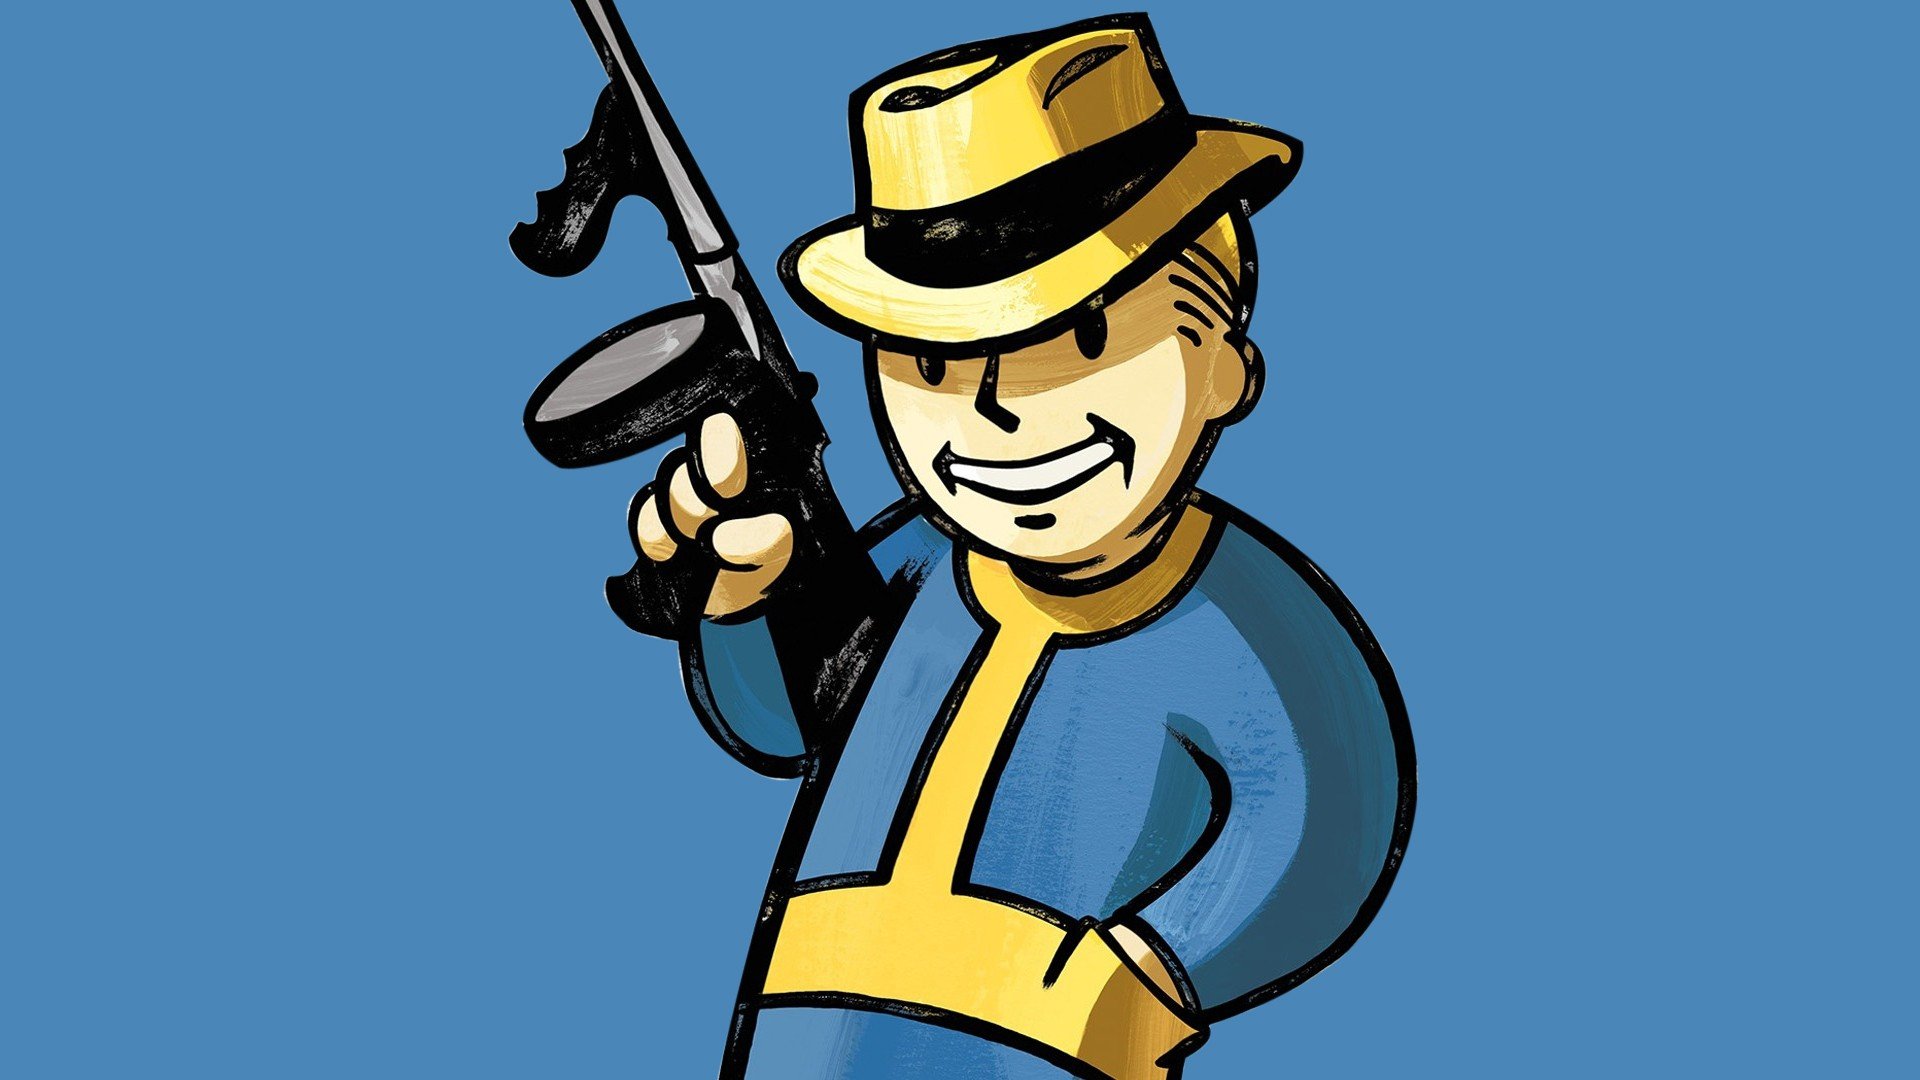 Fallout Bethesda Softworks Pip Boy Role Playing Game Wallpaper